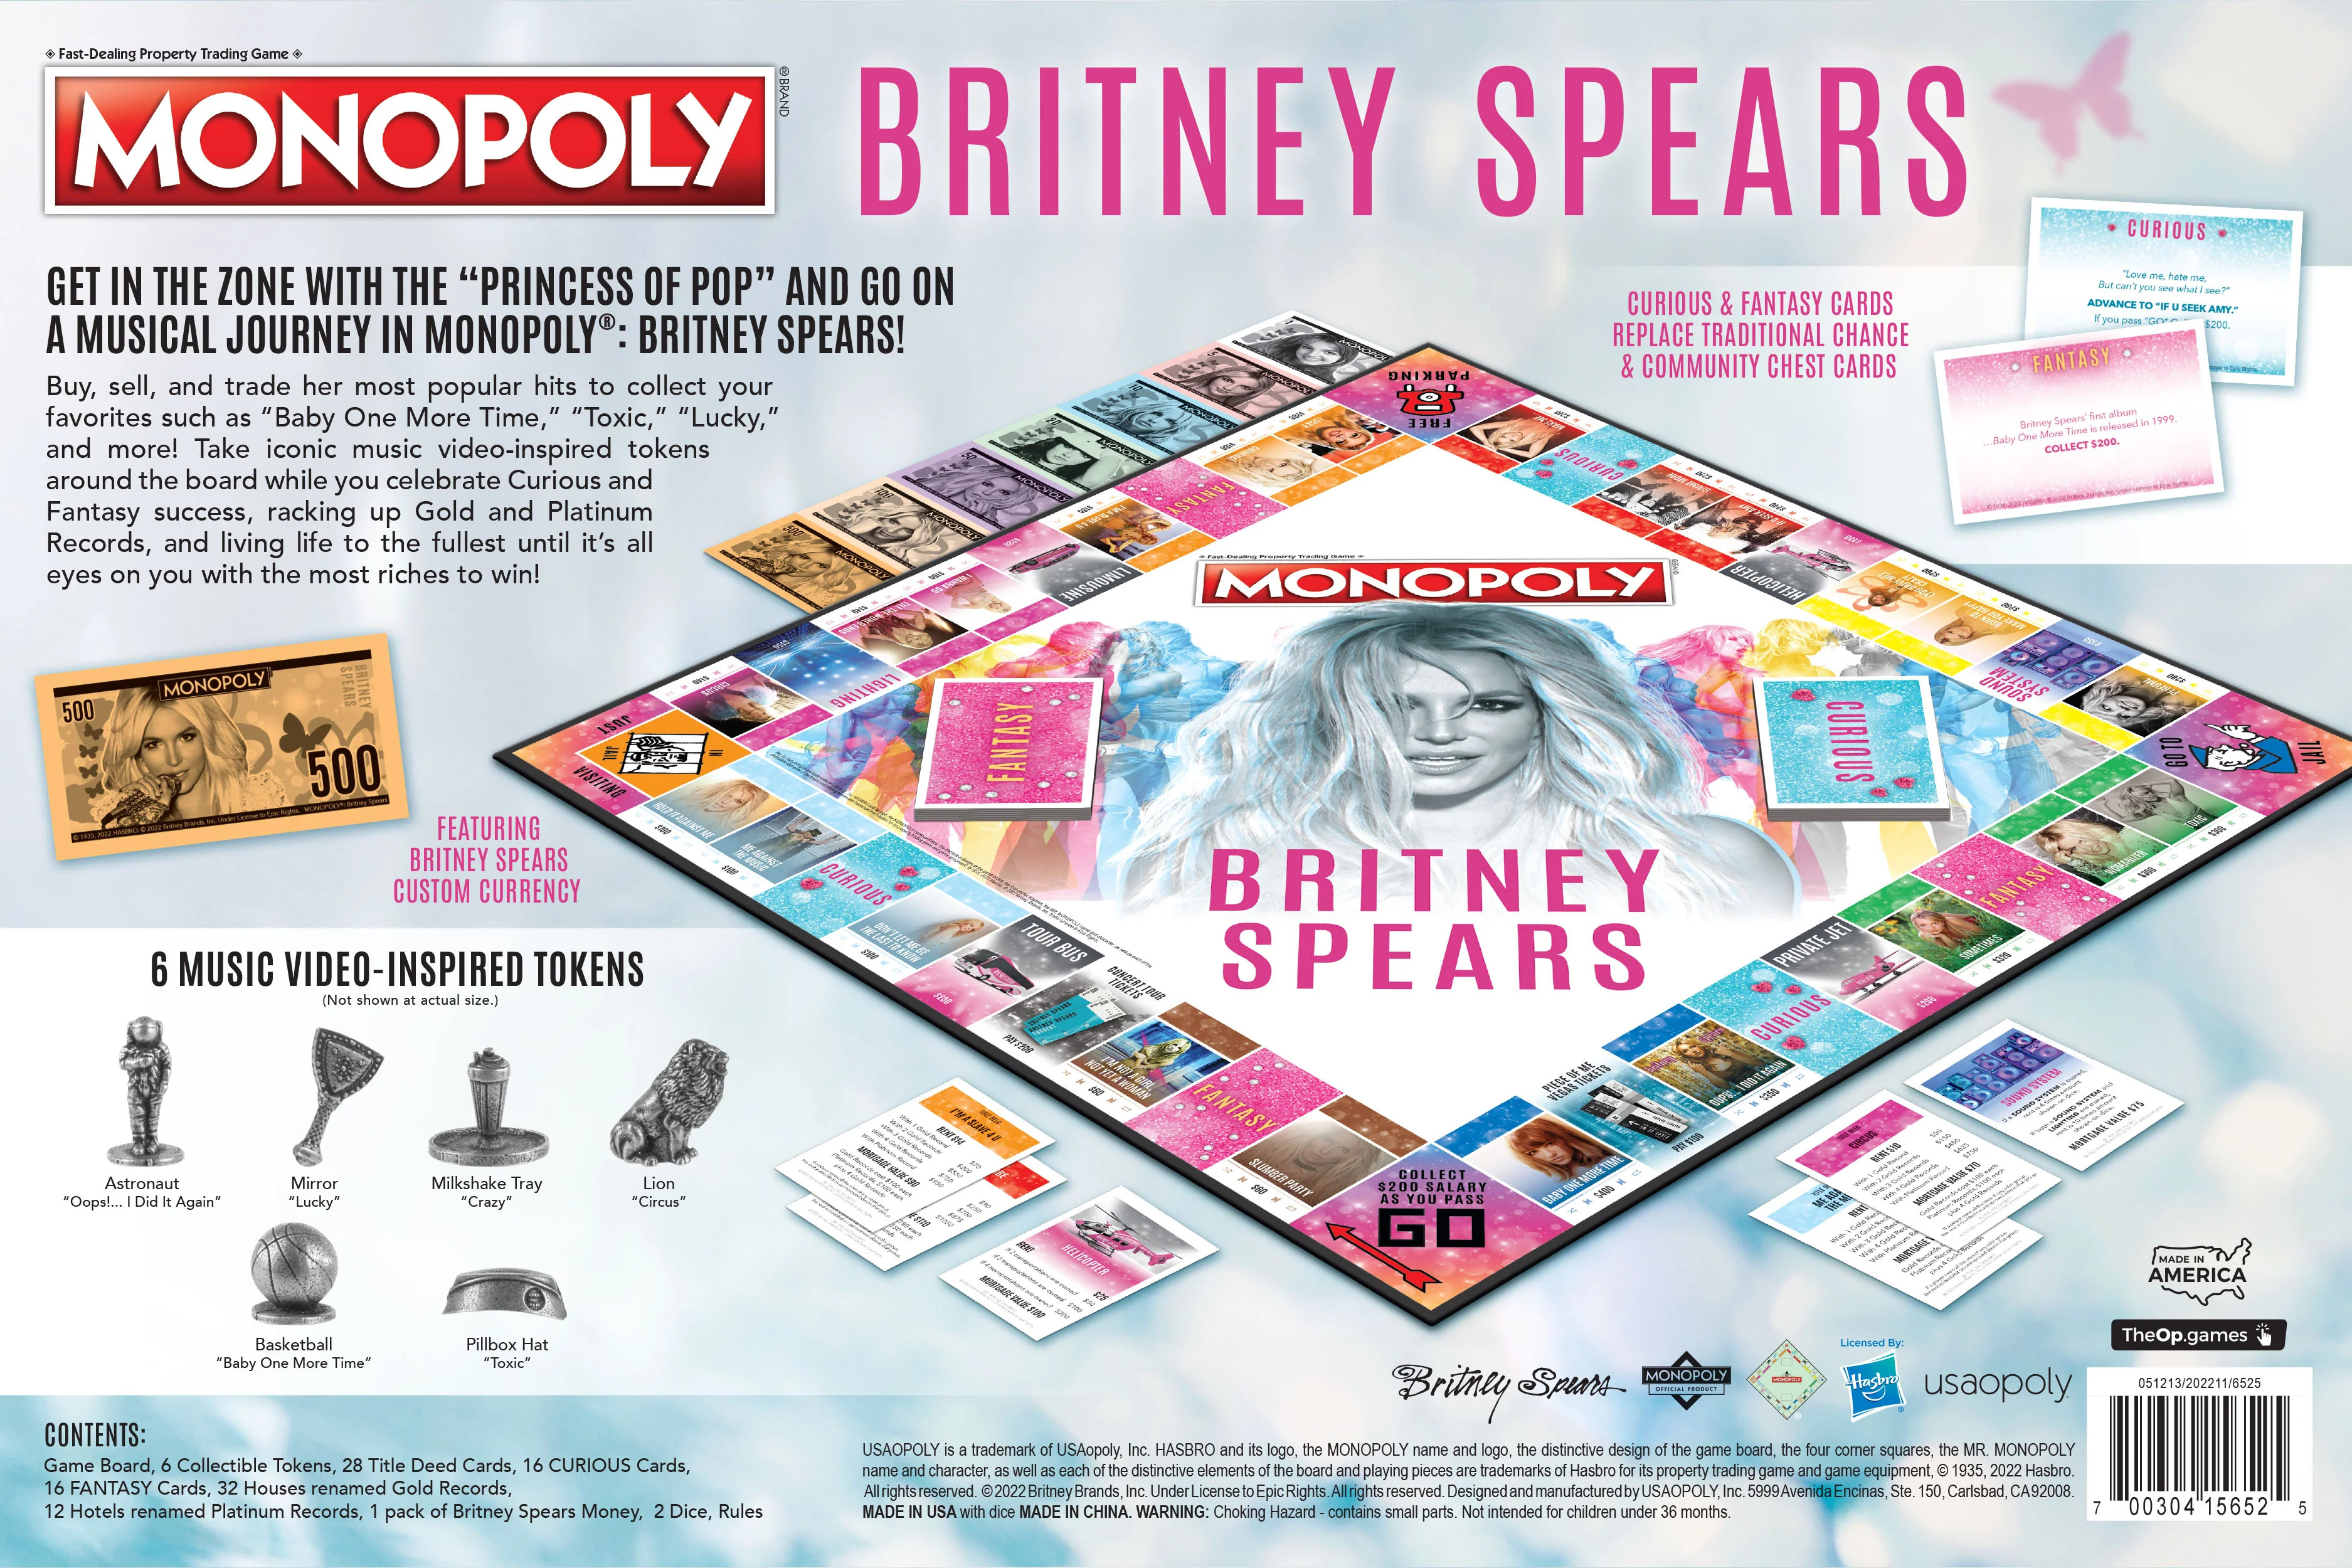 Britney Spears Monopoly game